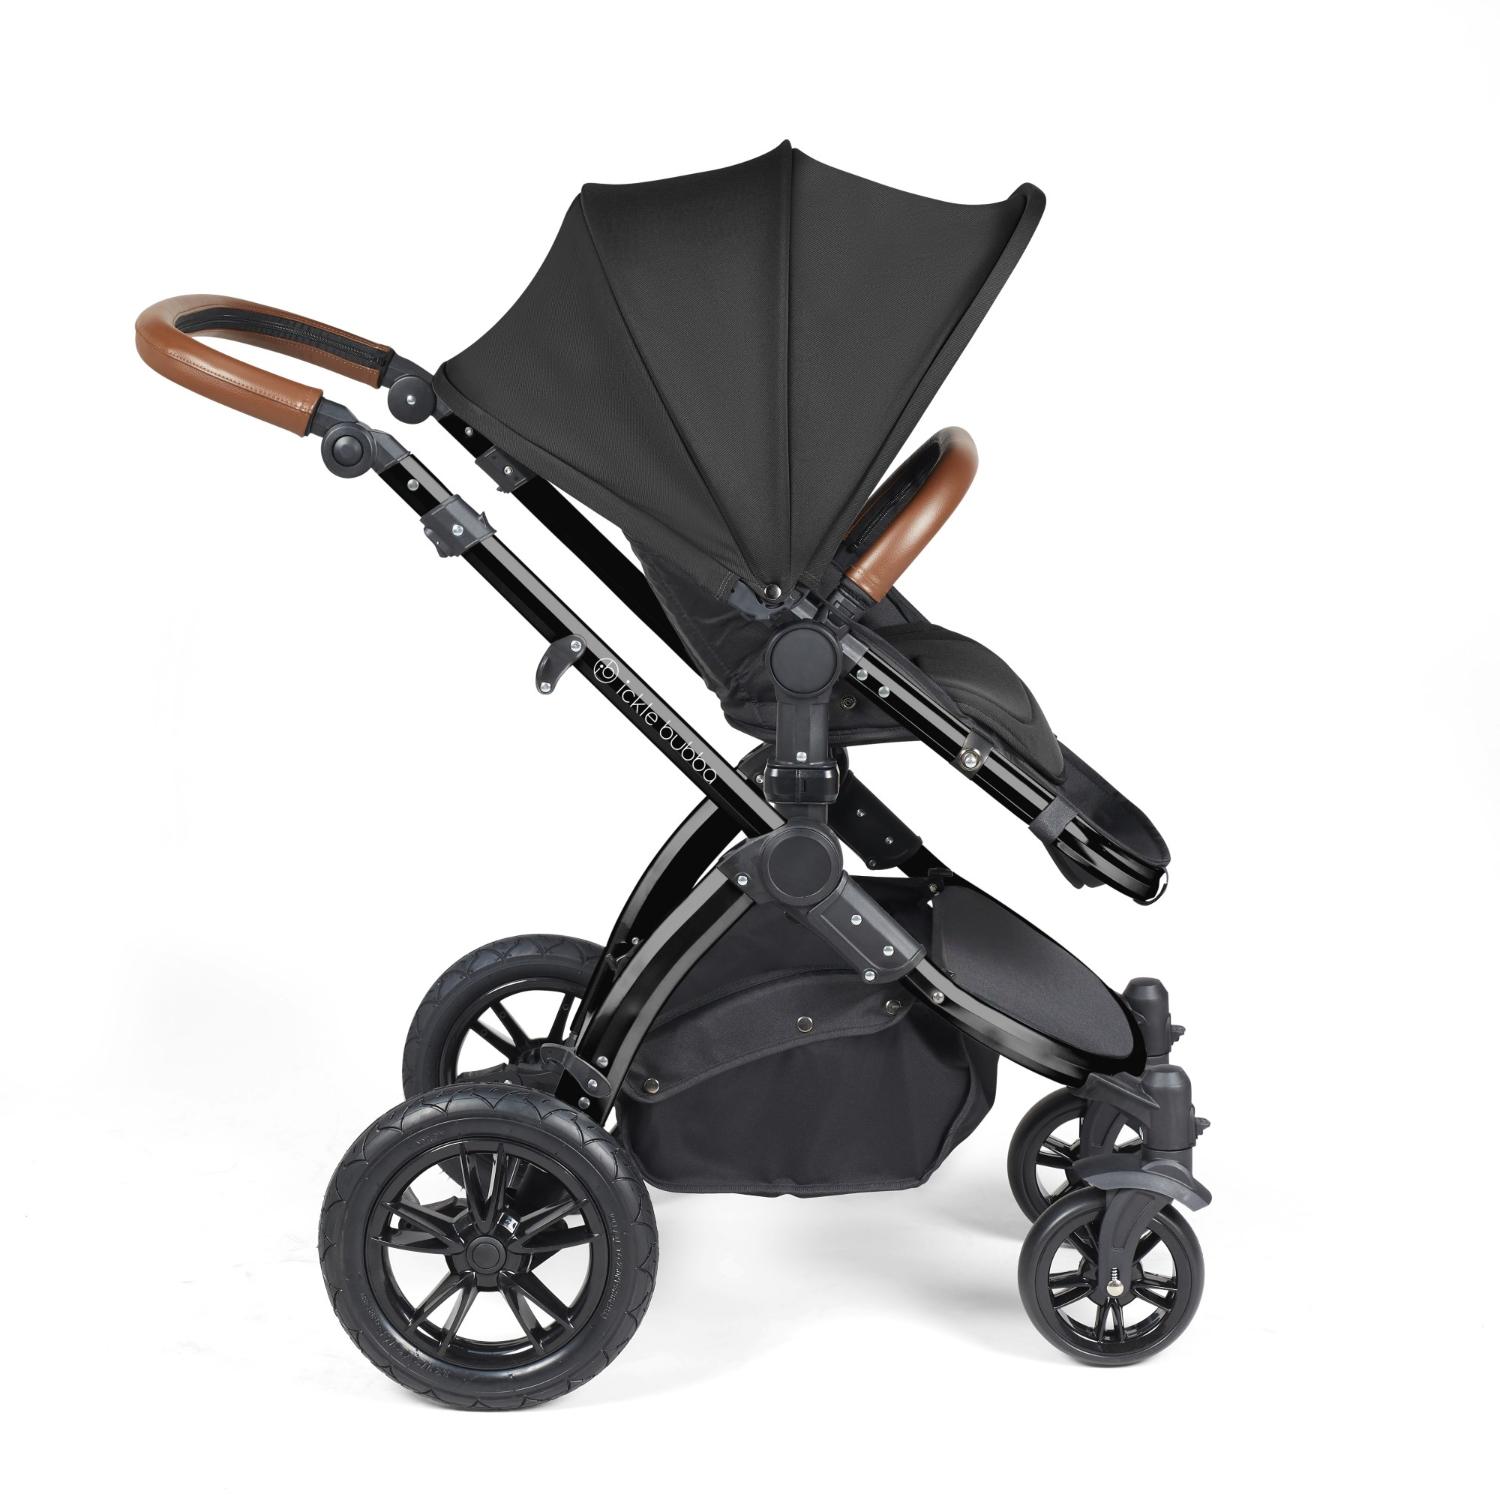 Side view of Ickle Bubba Stomp Luxe Pushchair with seat unit attached in Midnight black colour with tan handle